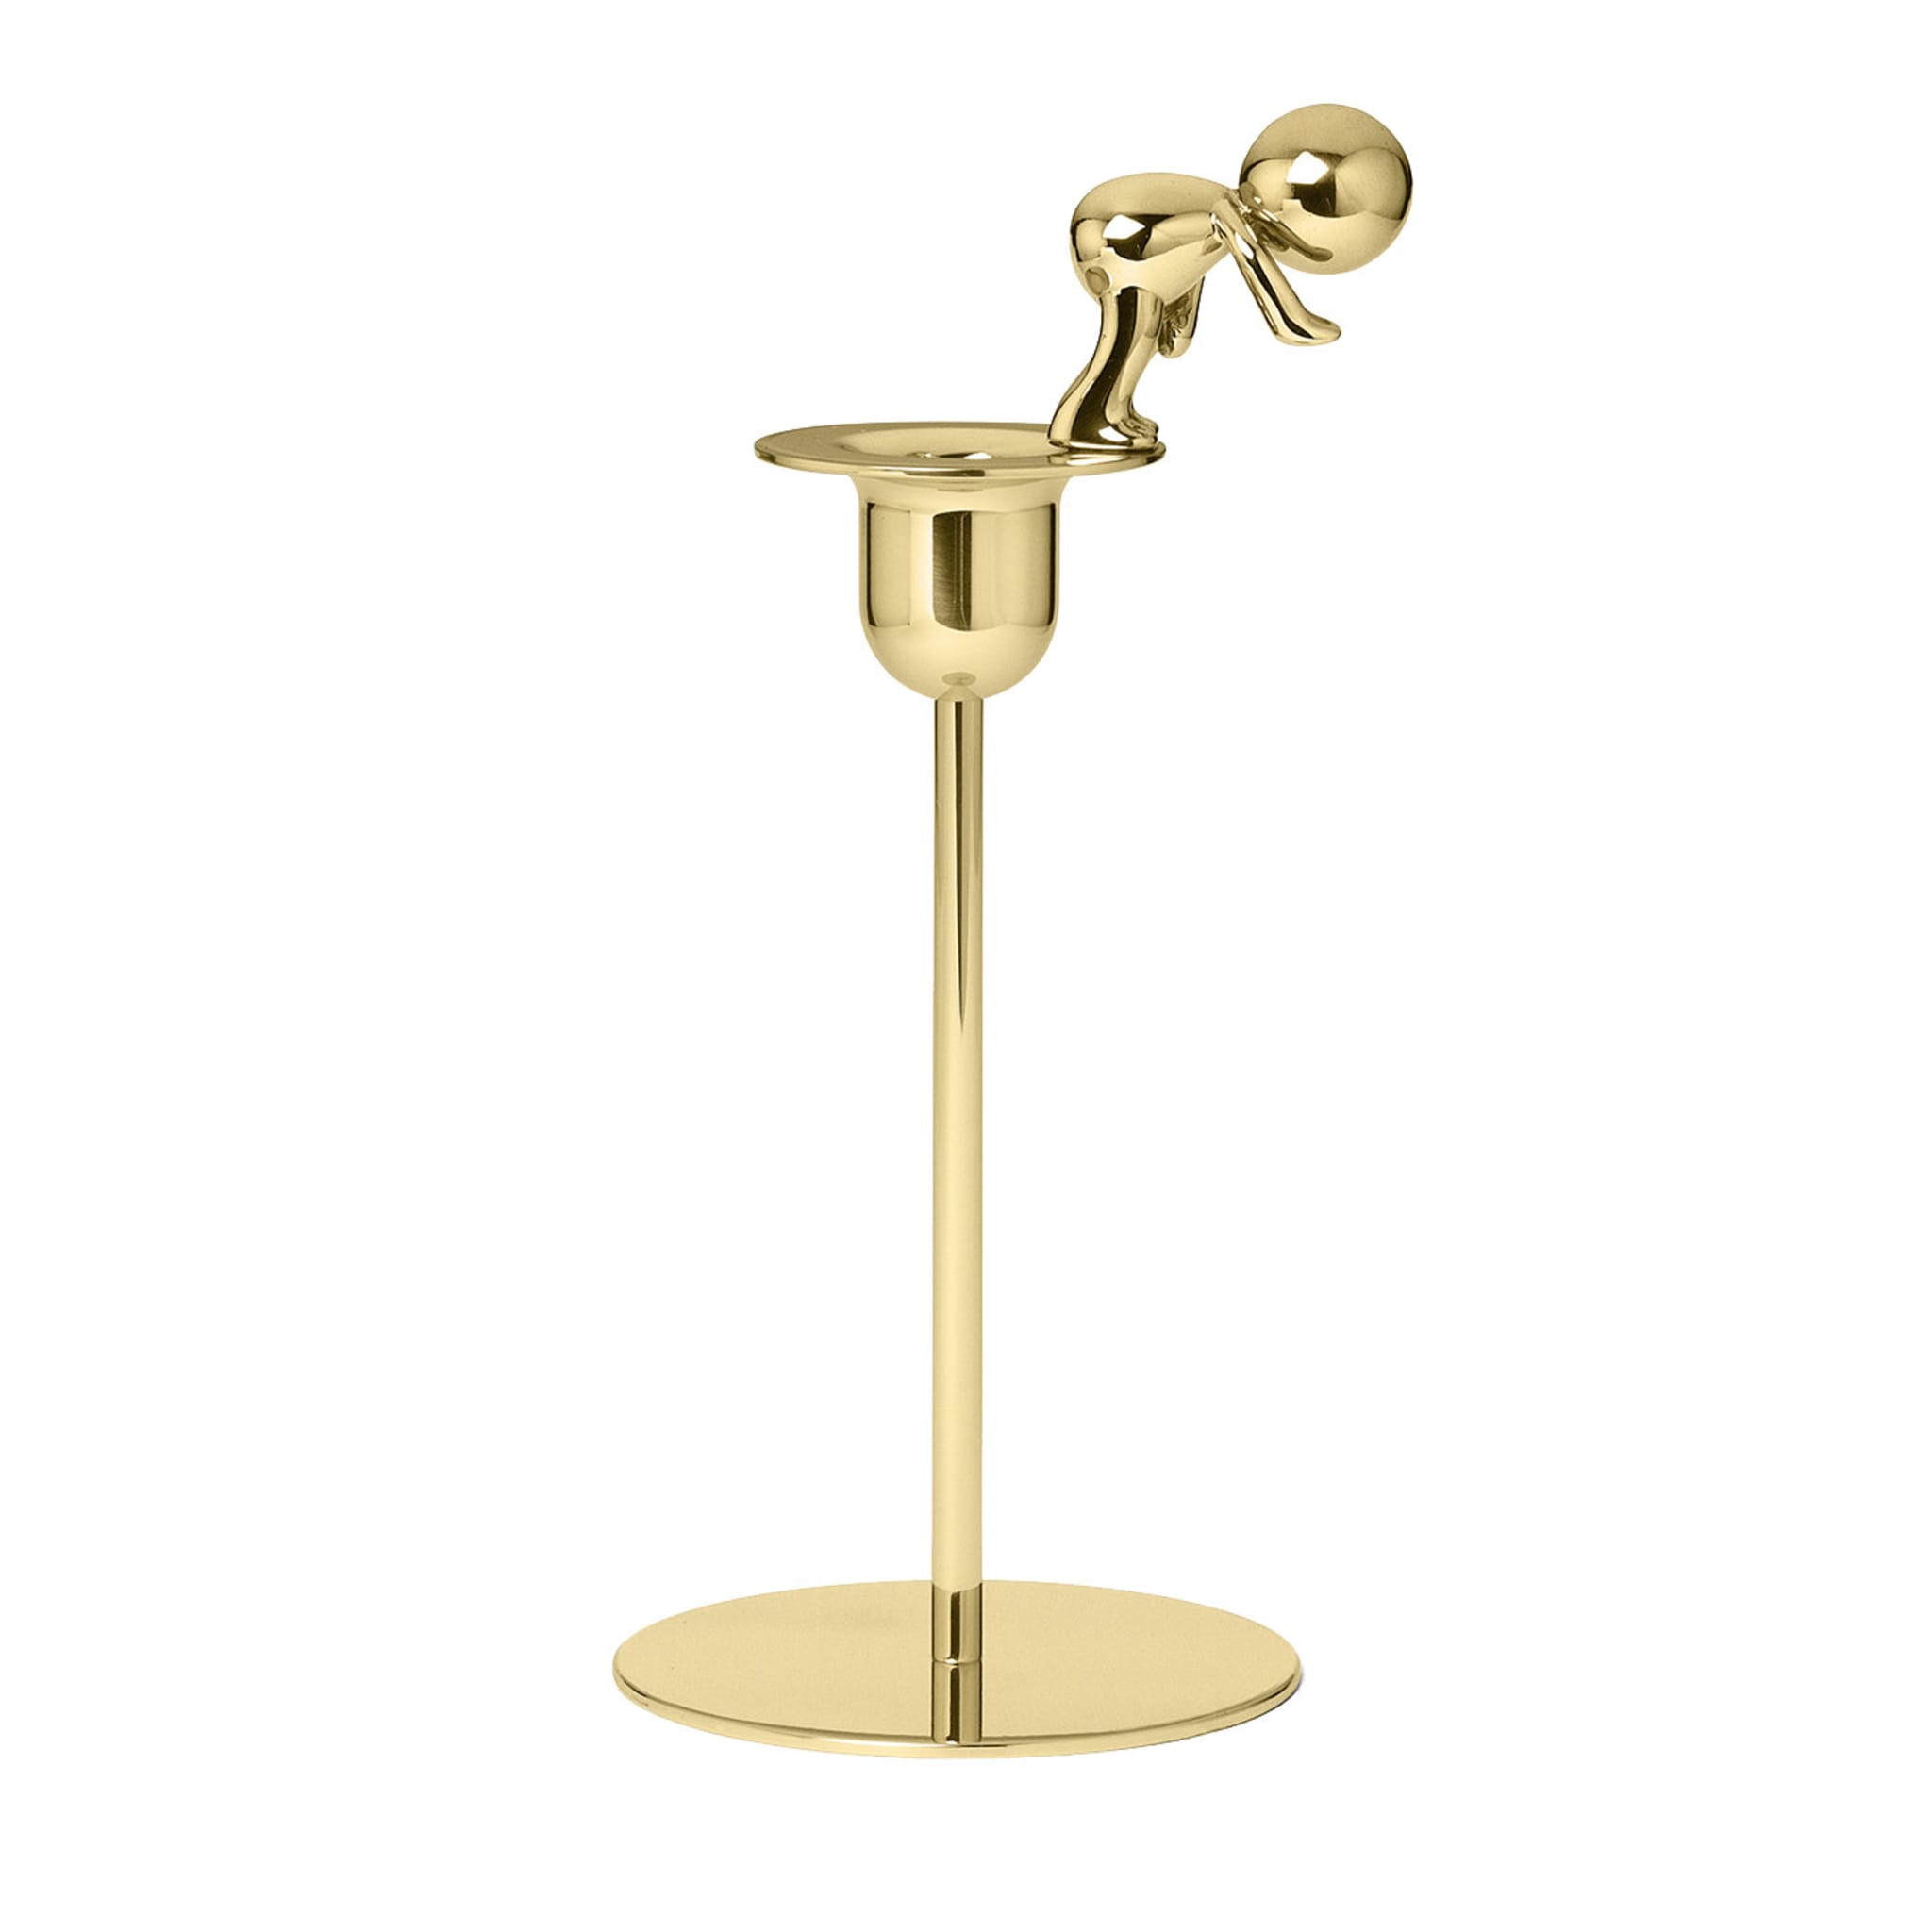 Omini Diver Short Candlestick in Polished Brass By Stefano Giovannoni - Main view